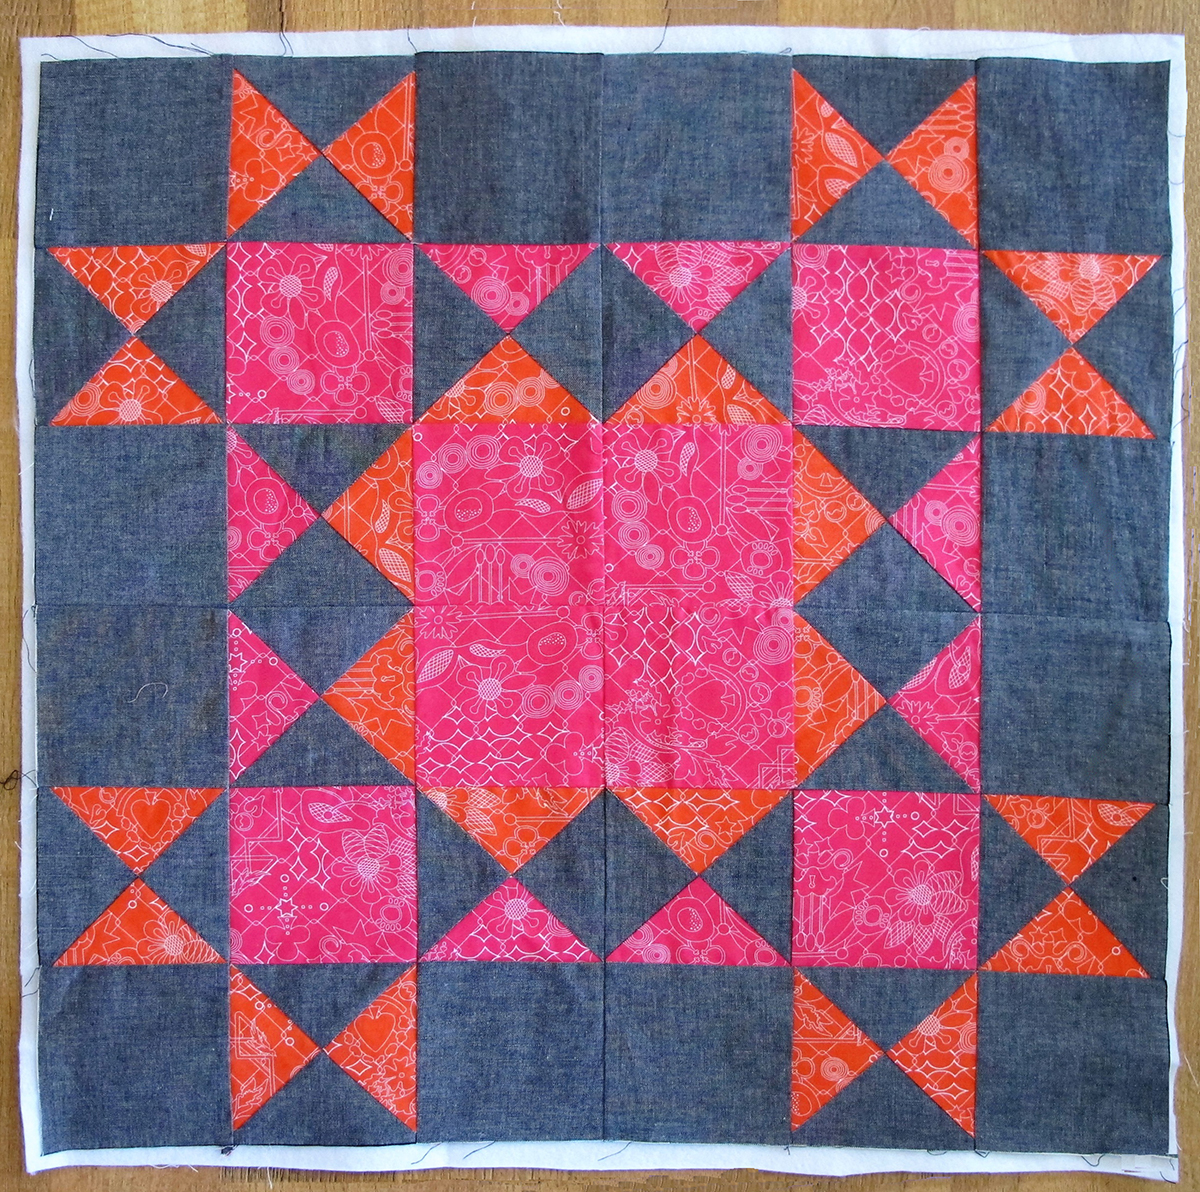 Seam the four blocks together with the pink corner square facing the center of the large 24 ½″ square